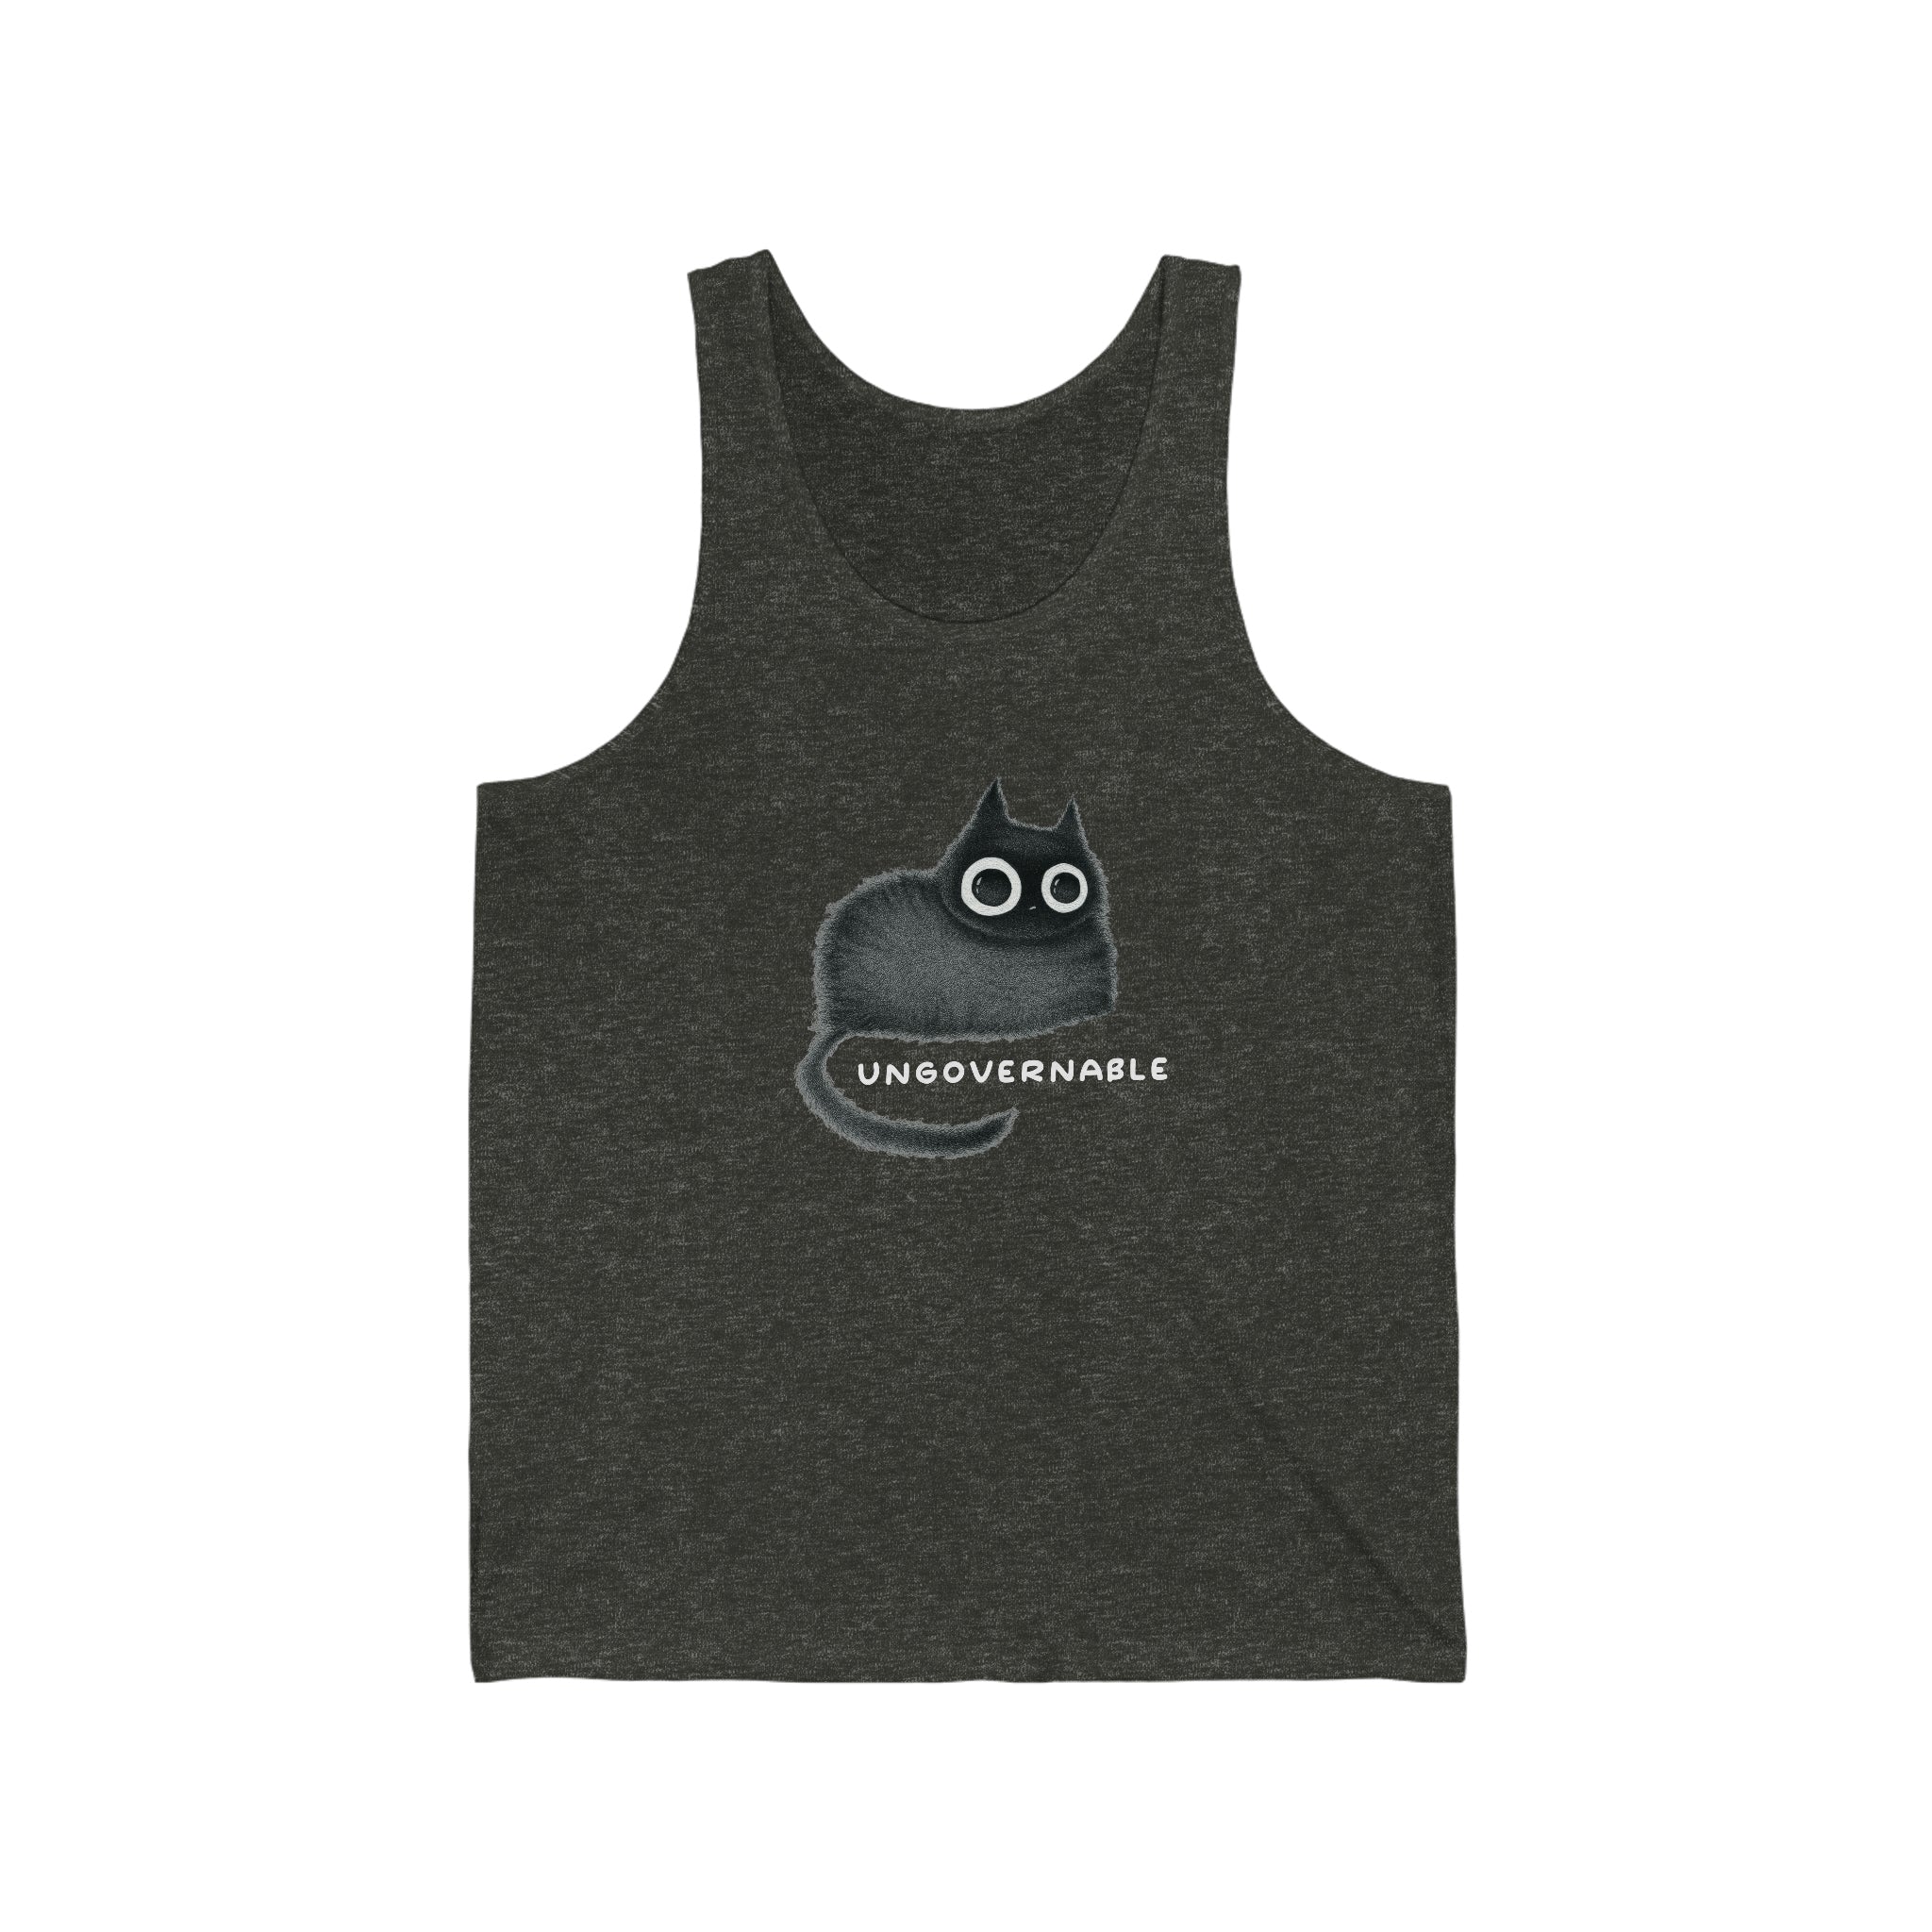 Ungovernable : Unisex Jersey Tank Top 100% Cotton, by Bella+Canvas